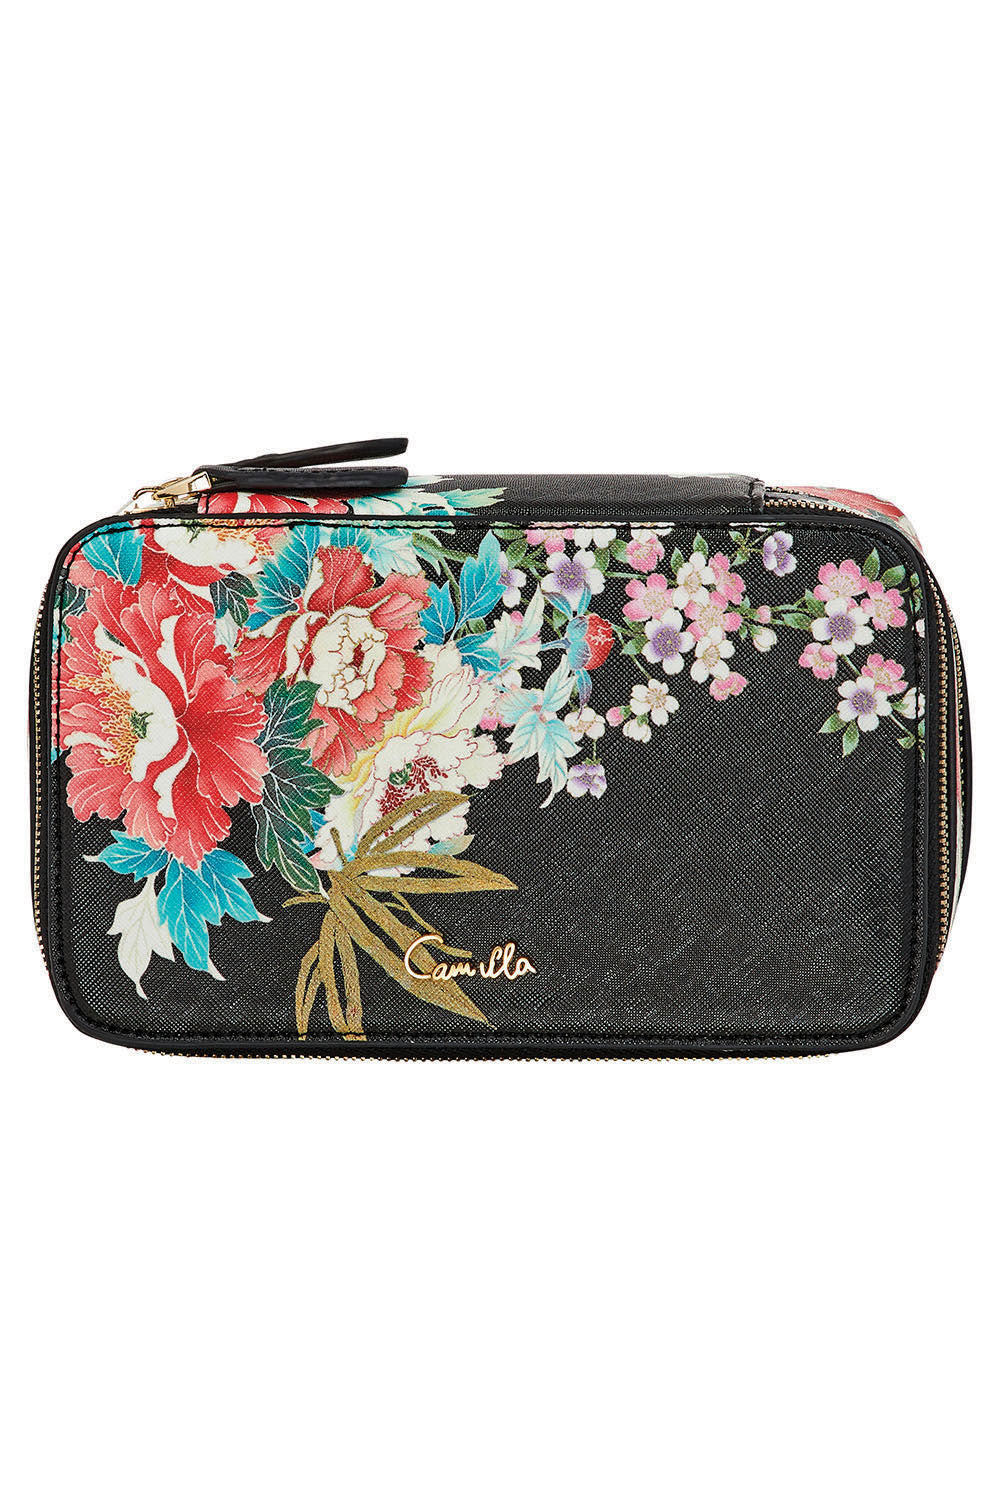 CAMILLA QUEEN OF KINGS COSMETIC CASE